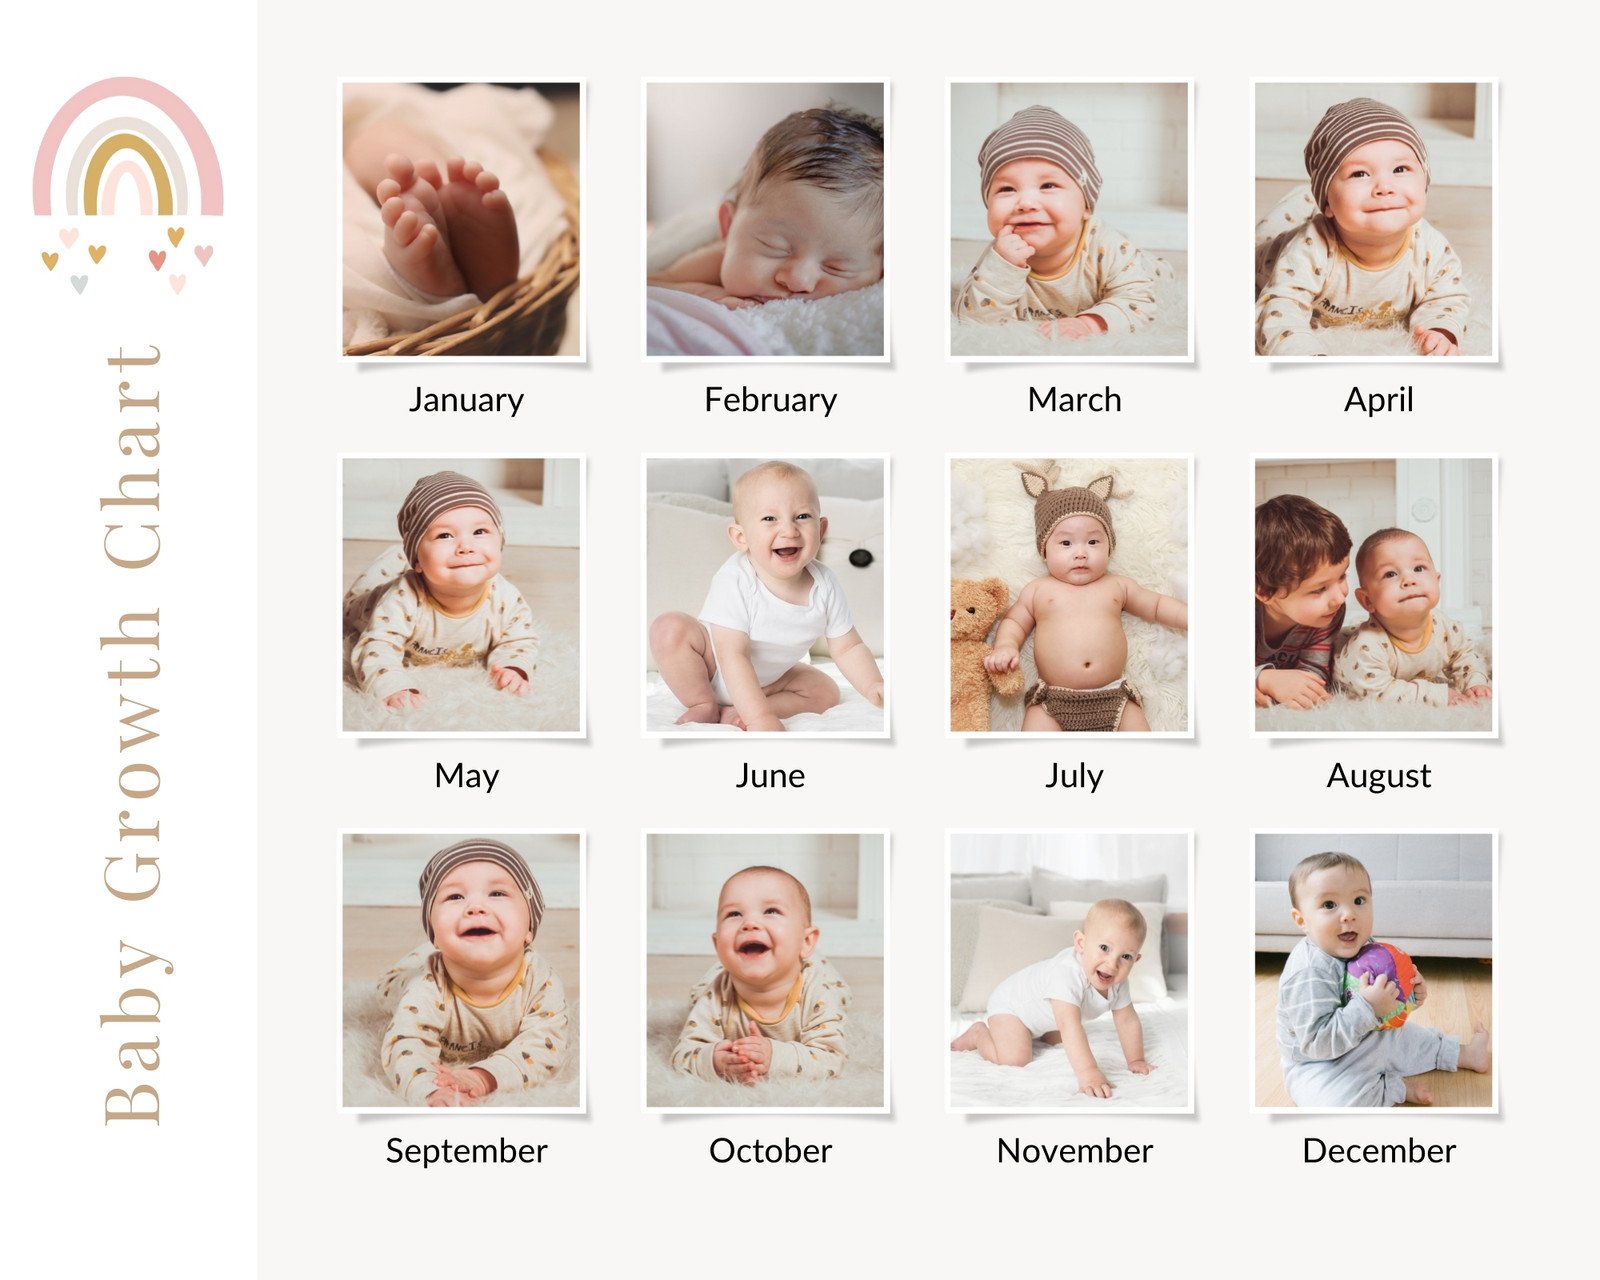 Free and customizable baby photo collage templates | Canva